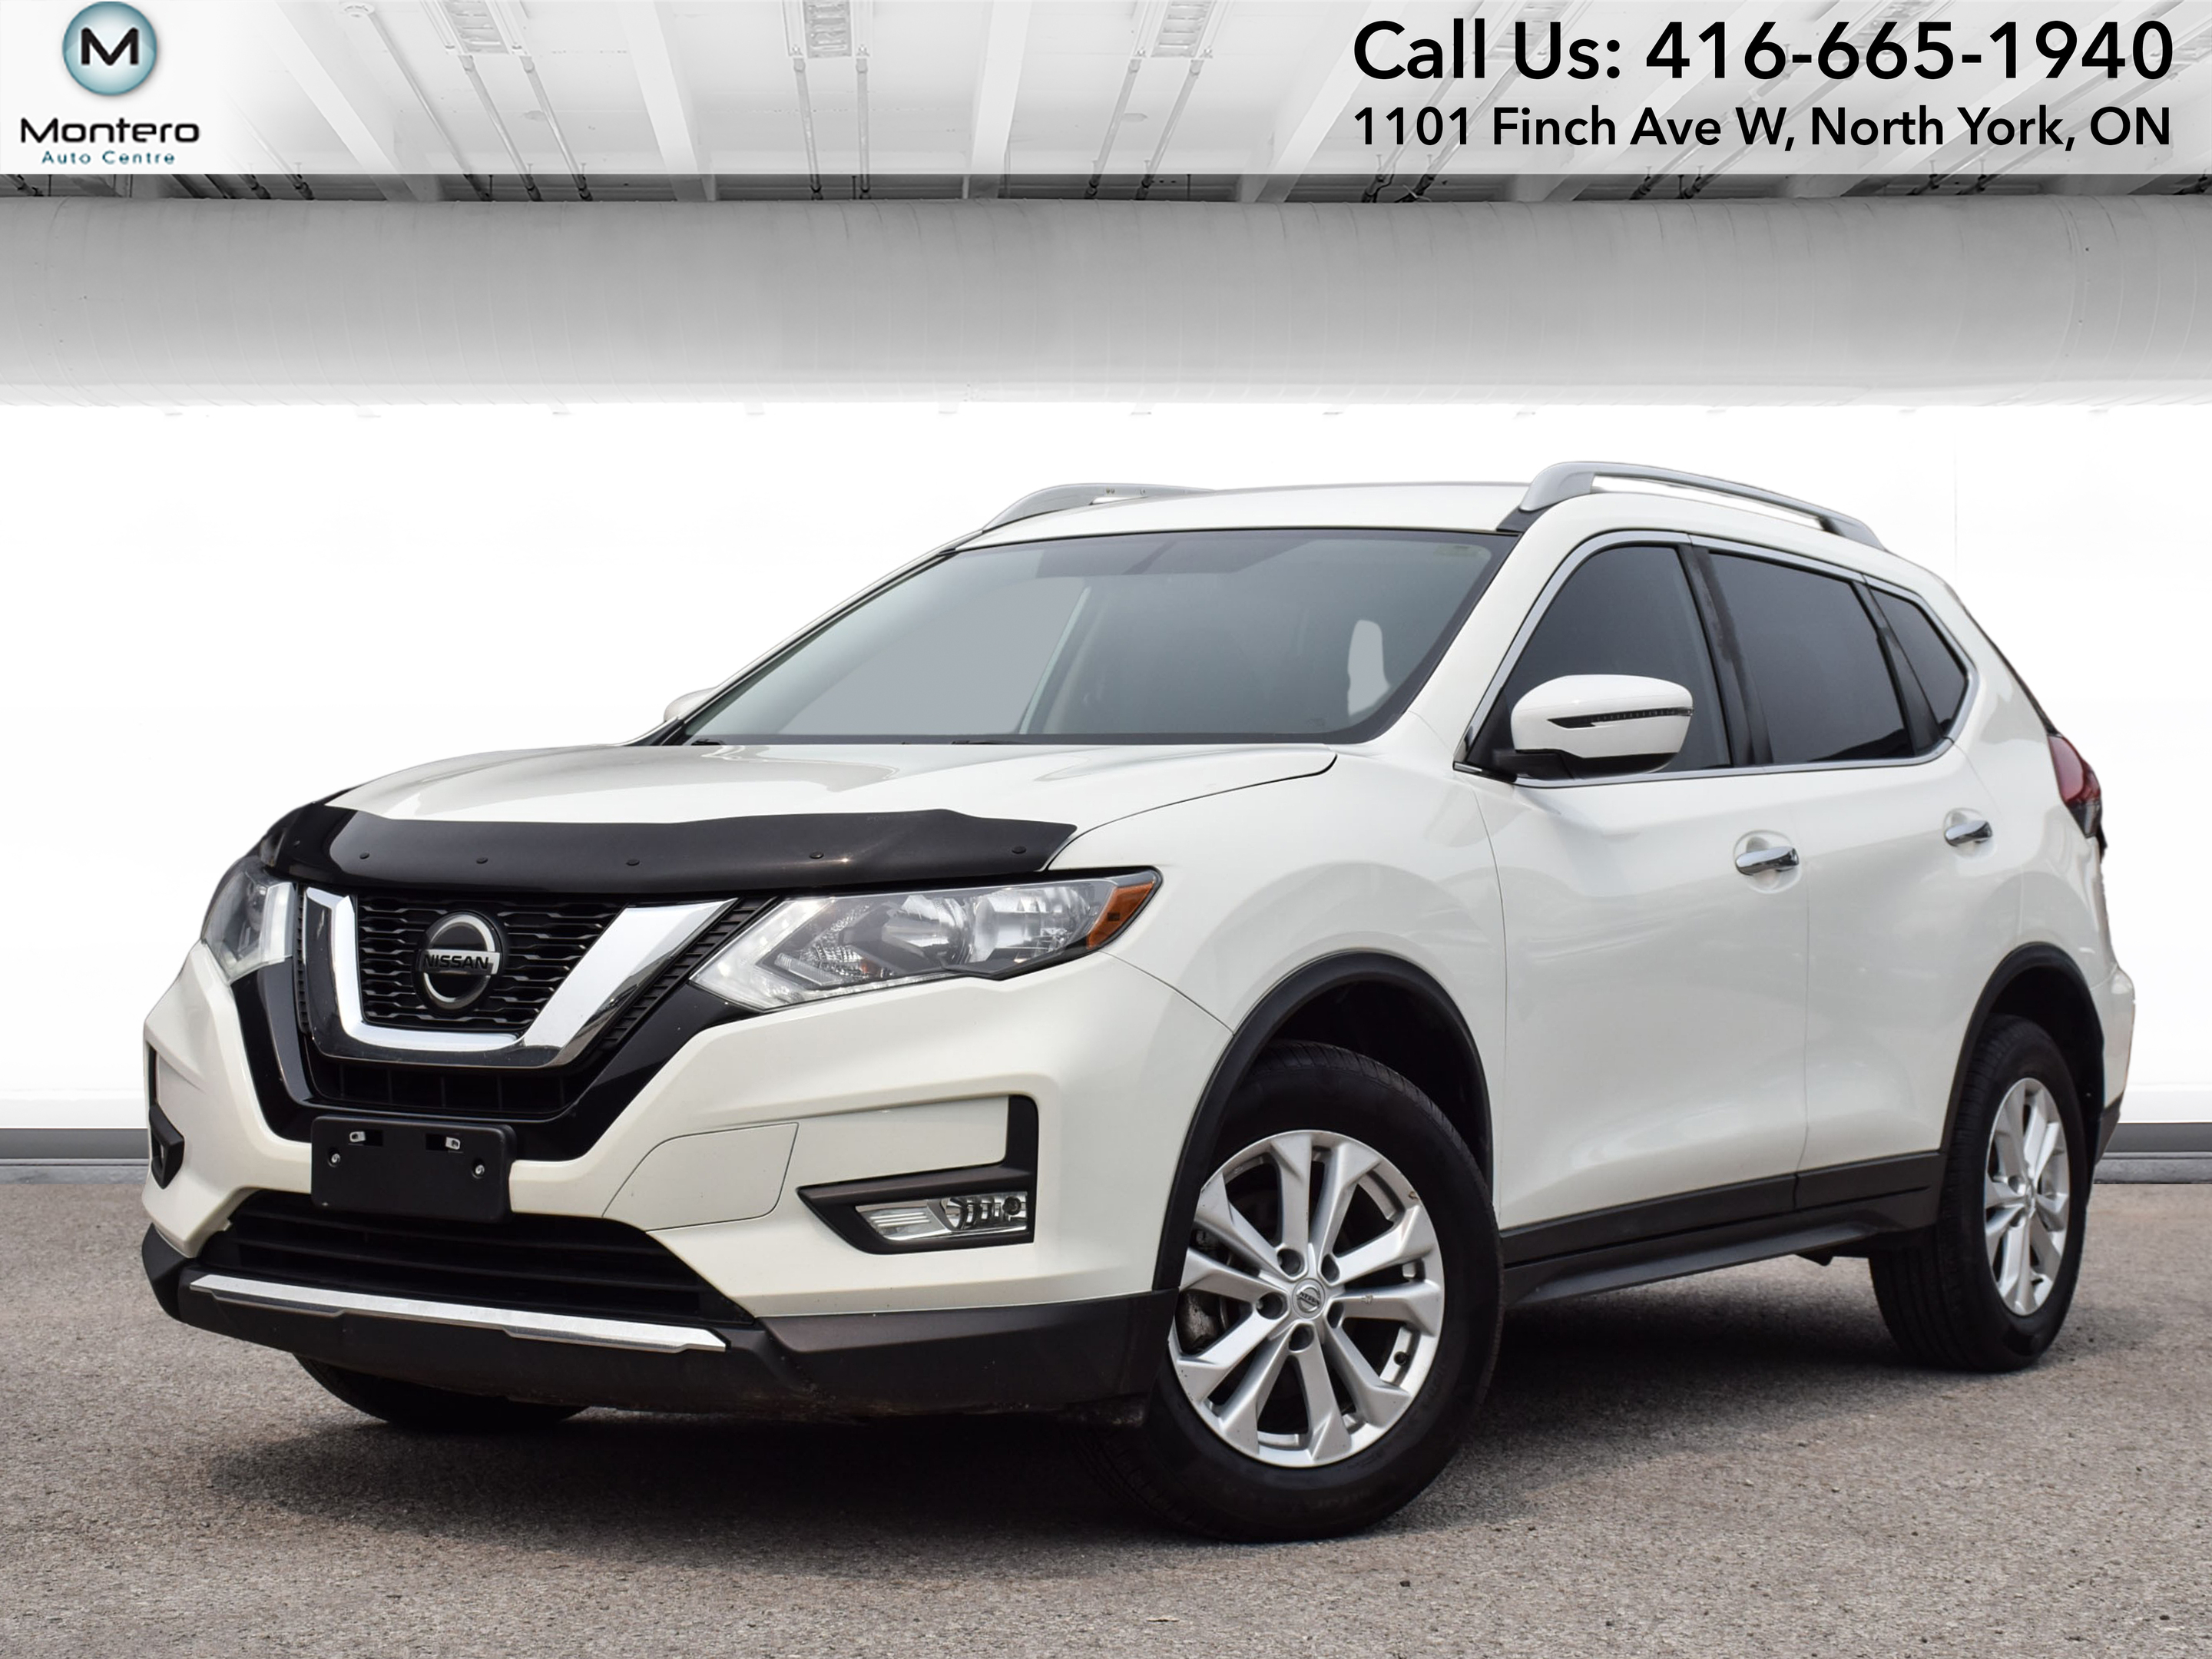 2018 Nissan Rogue AWD SV BACK UP CAM ALLOY RIMS 